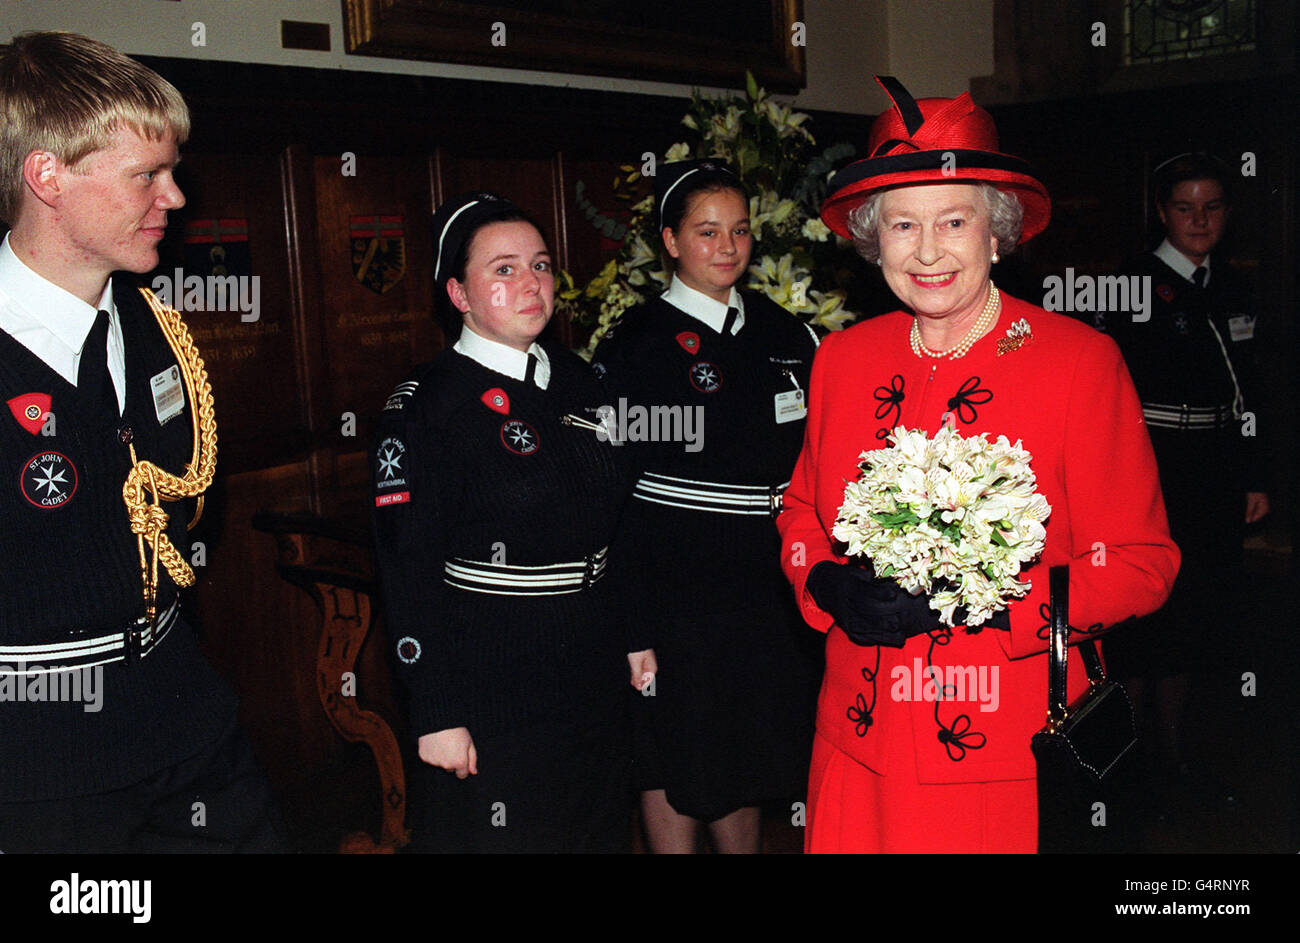 Her Majesty the Queen pays tribute to St Johns Ambulance volunteers, as she marked the 900th anniversary of the Order of St John at their headquarters in Clerkenwell, central London. Stock Photo